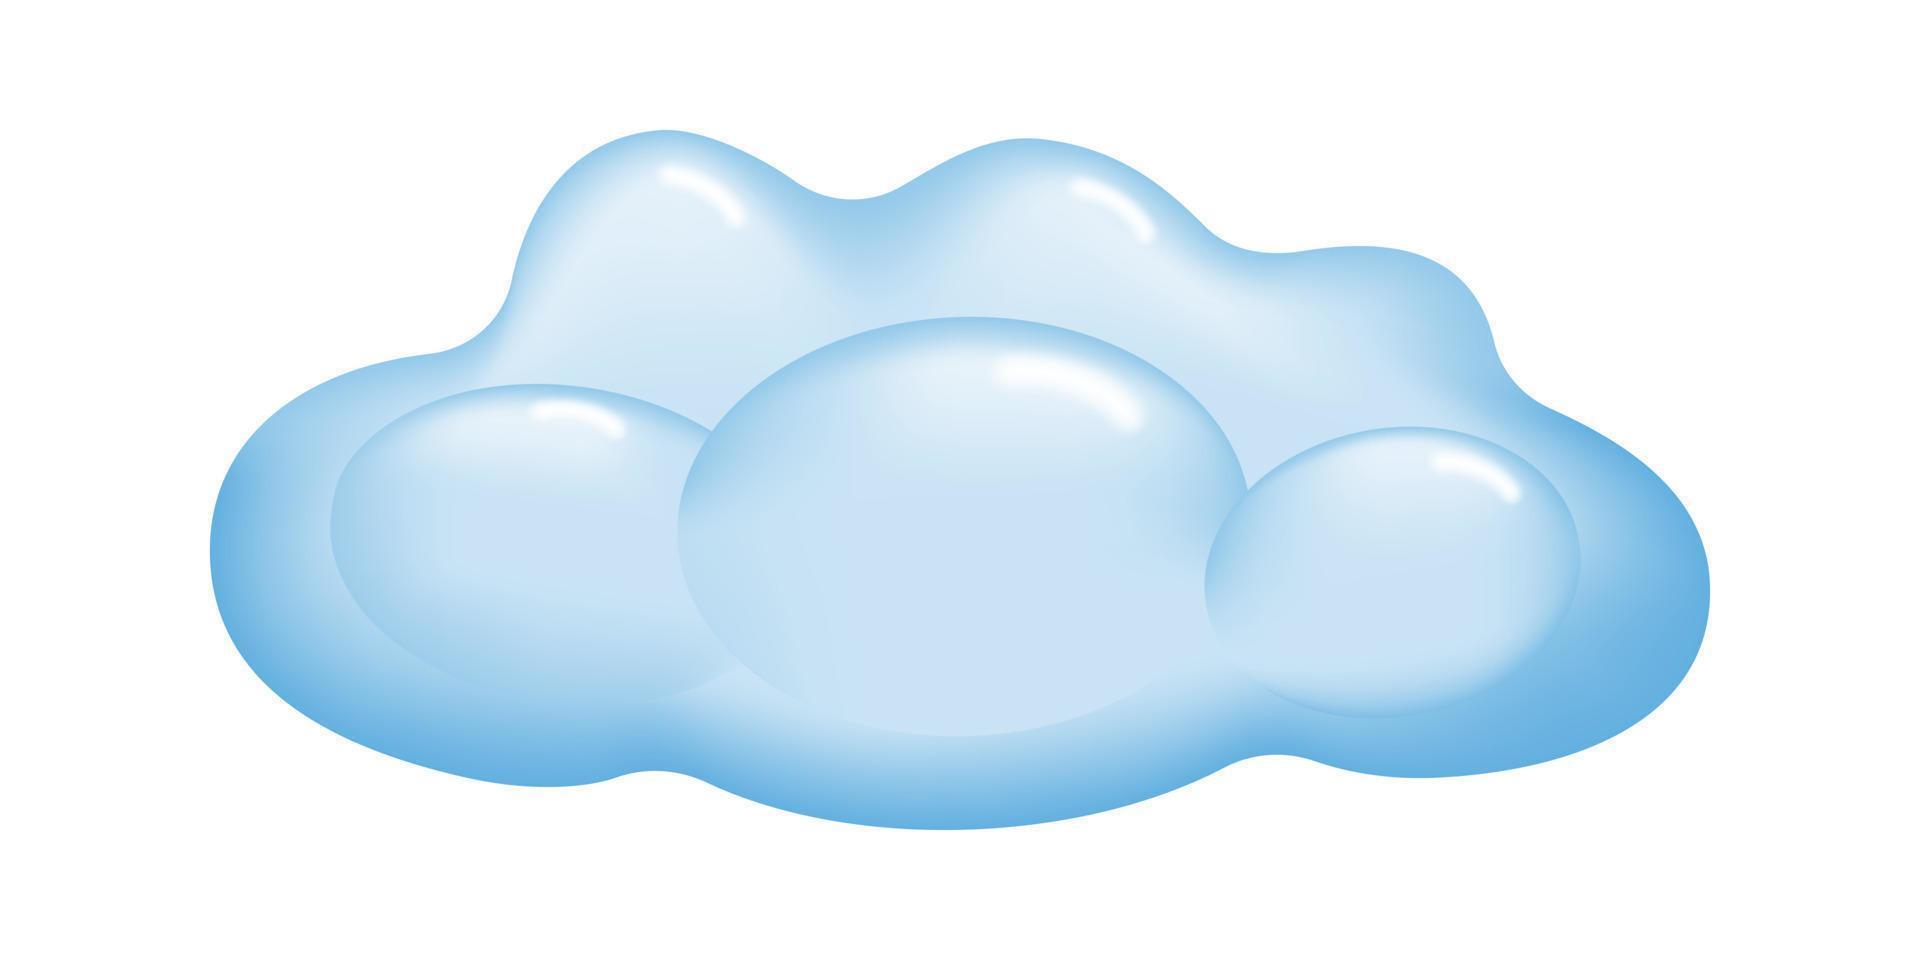 Cartoon blue fluffy cloud isolated on a white background. Vector illustration.